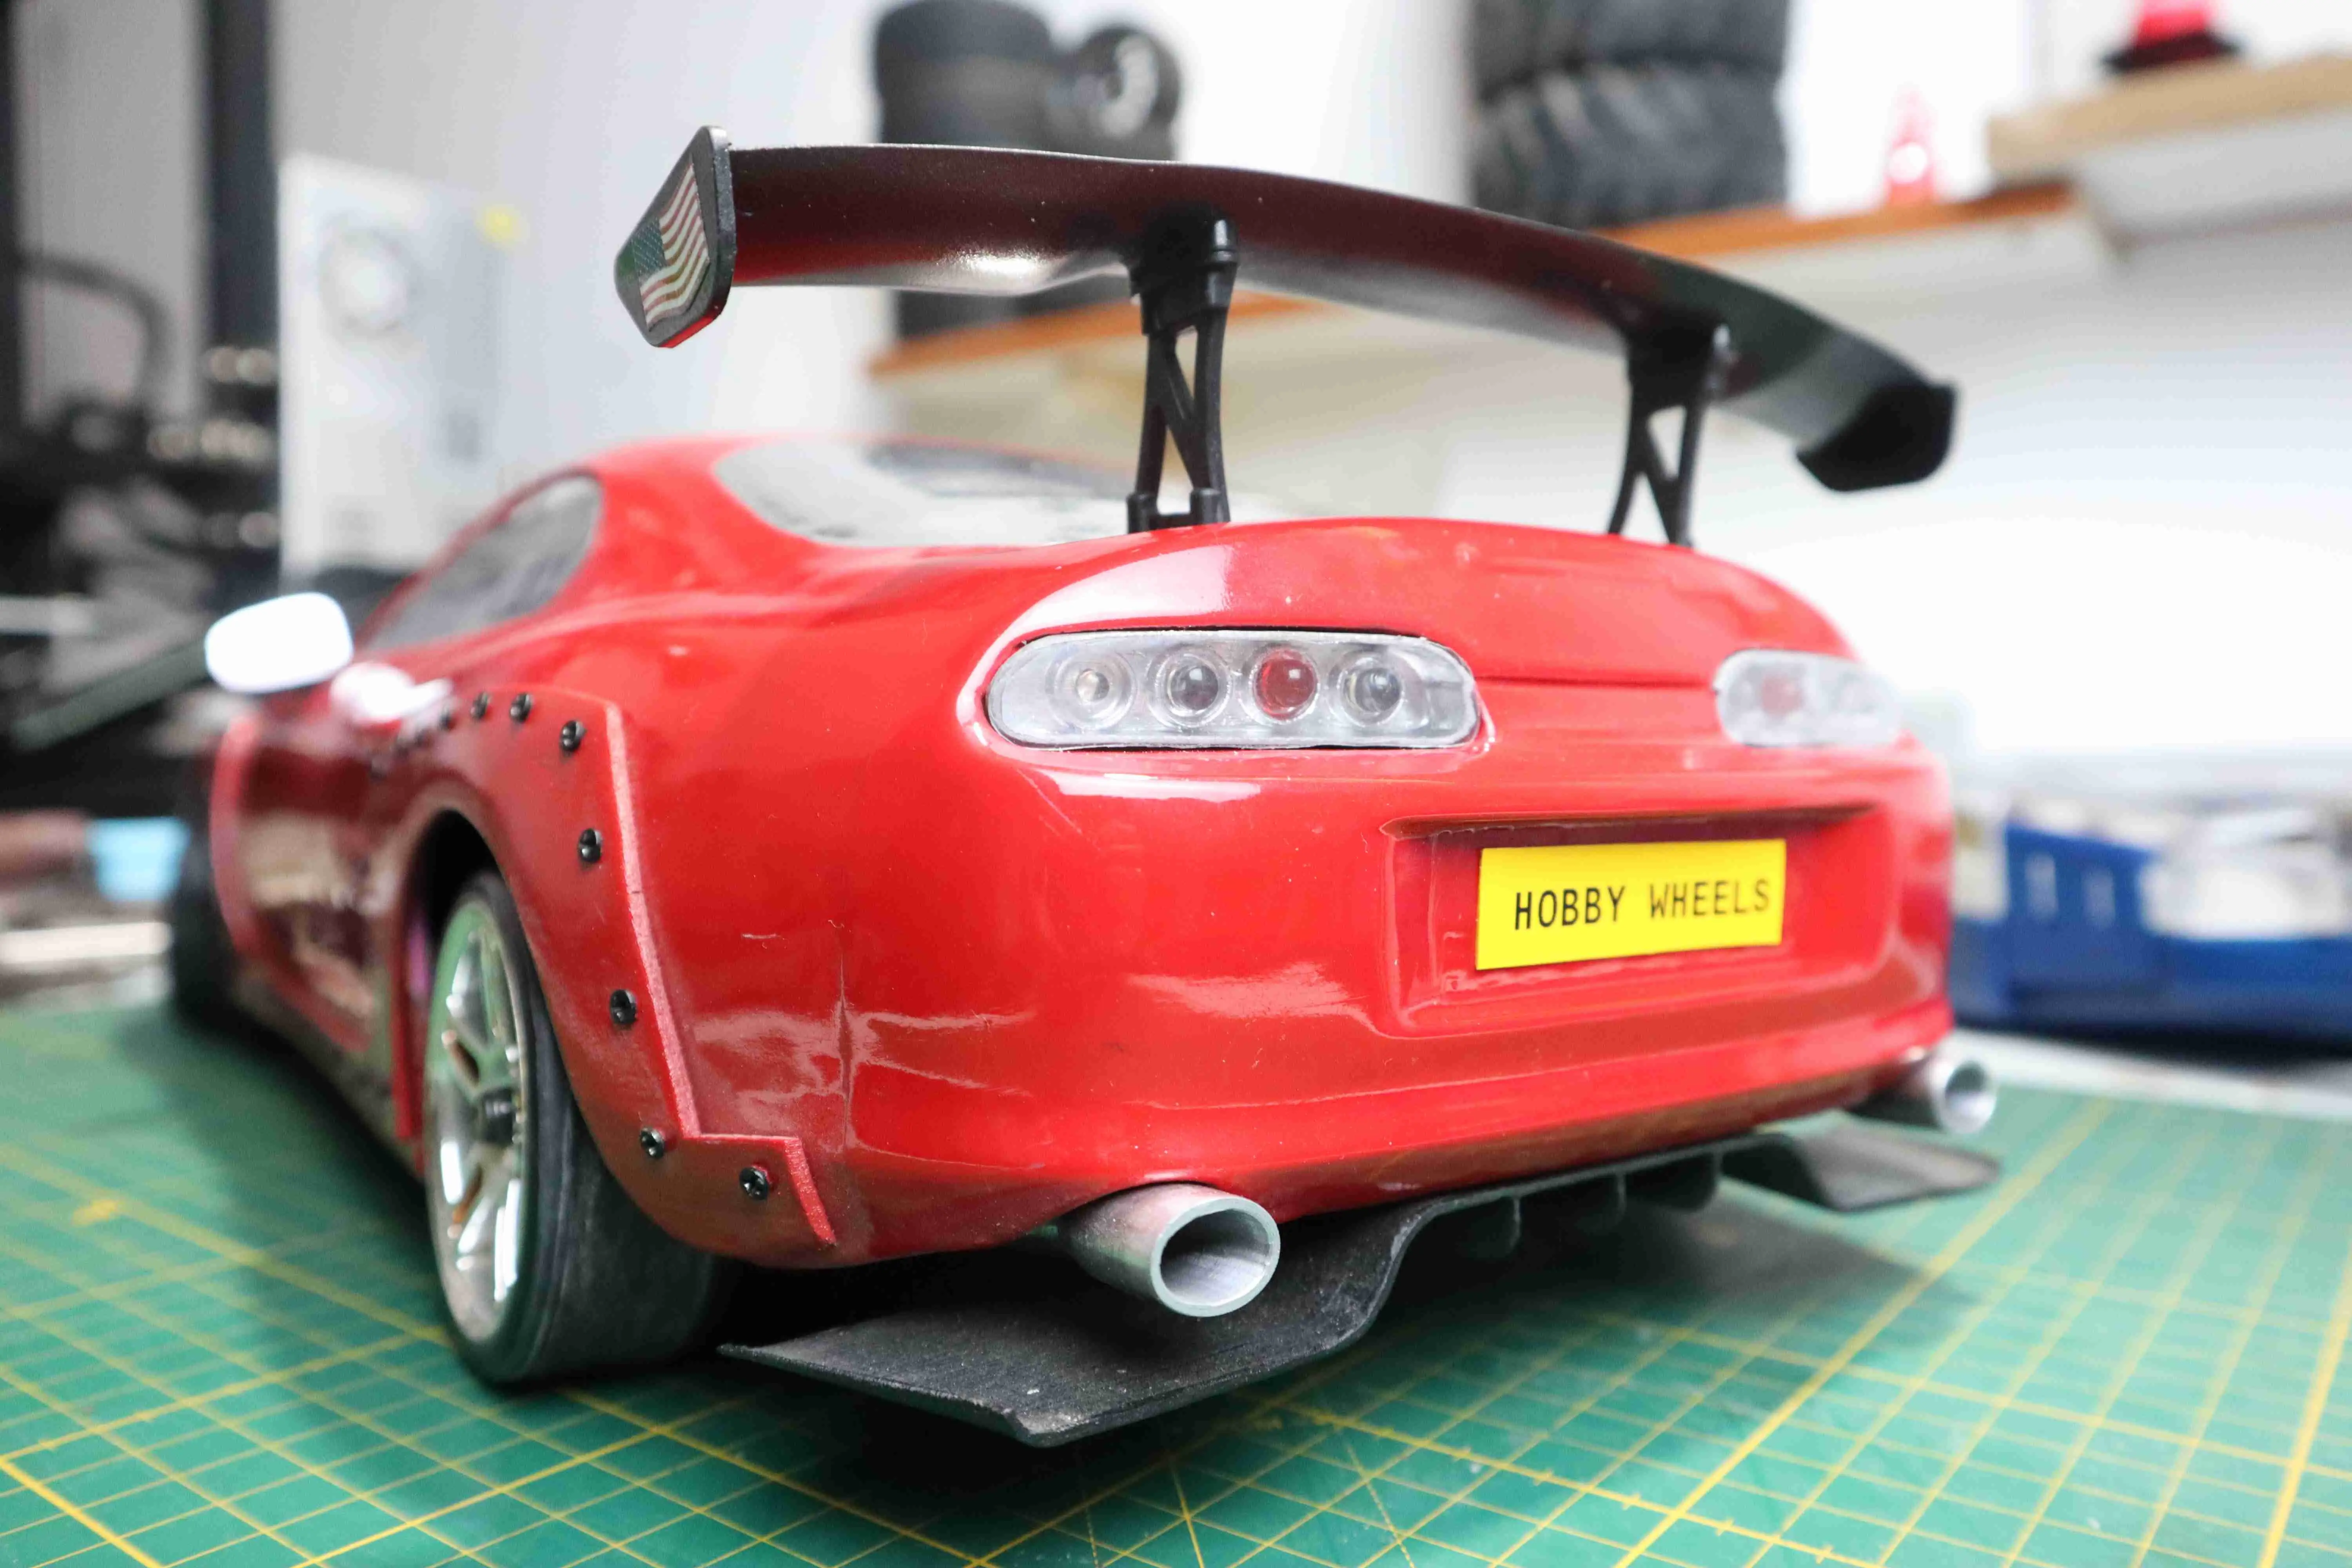 TOYOTA SUPRA 1:10 SCALE WITH WIDE BODY KIT